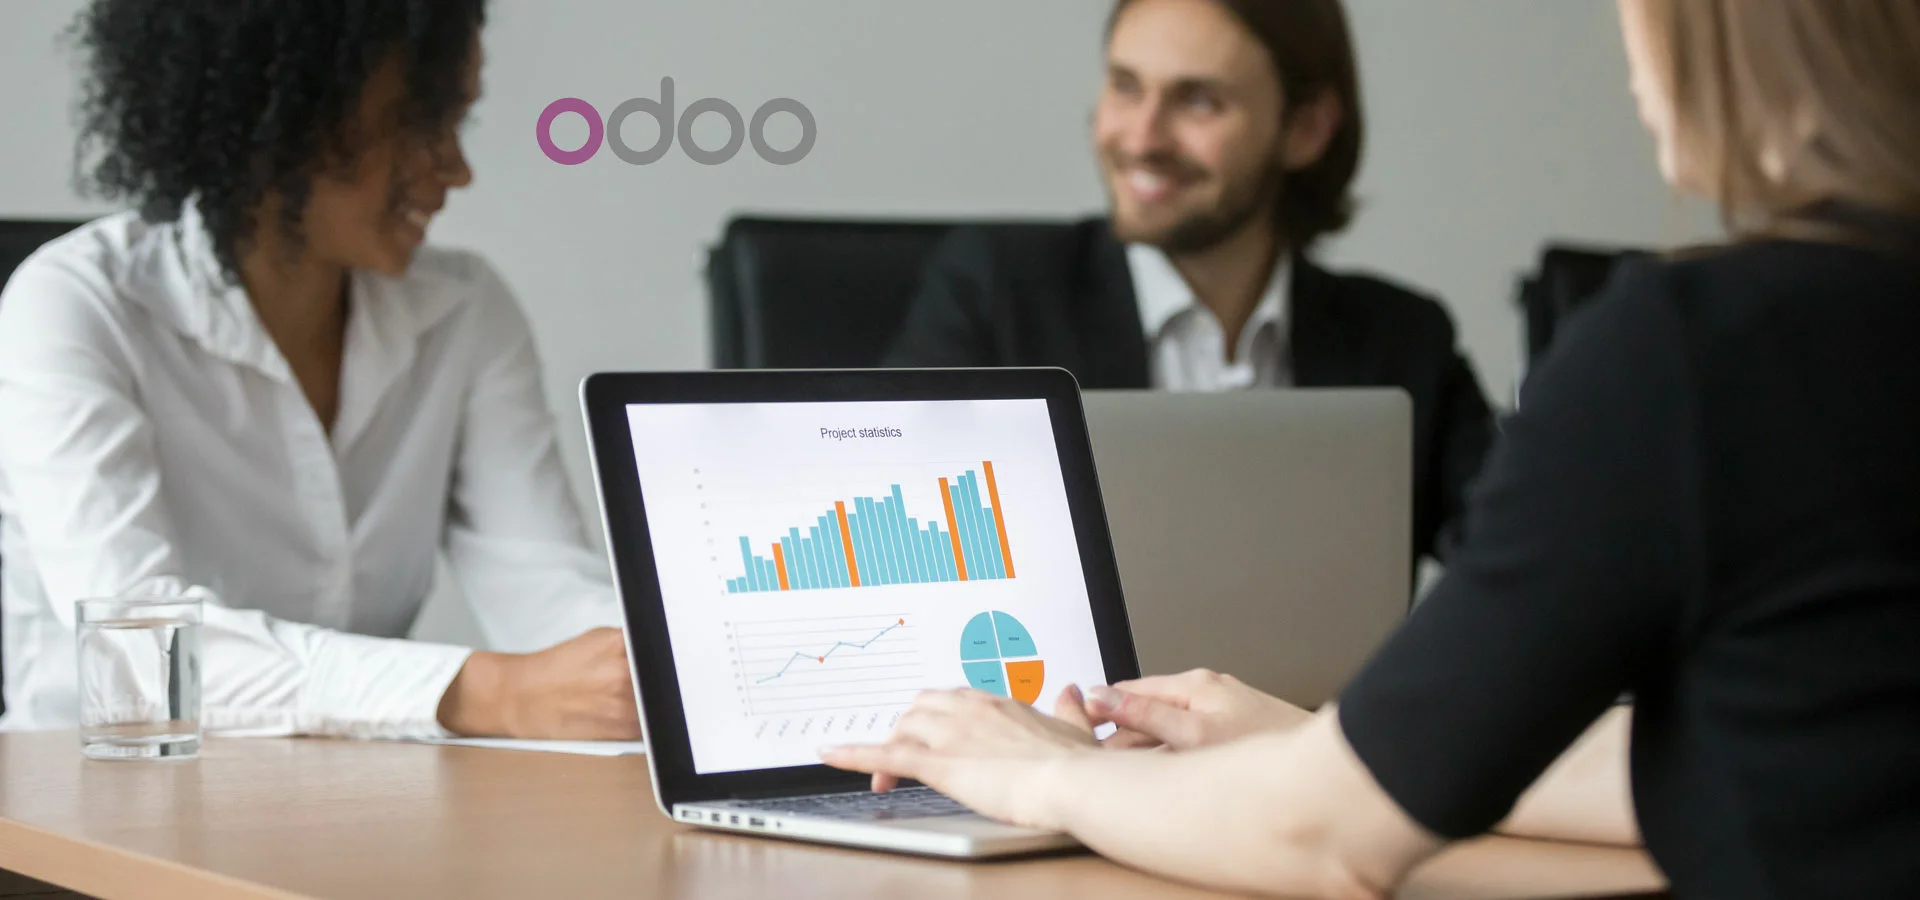 odoo-erp-support-and-services-related-blog-95